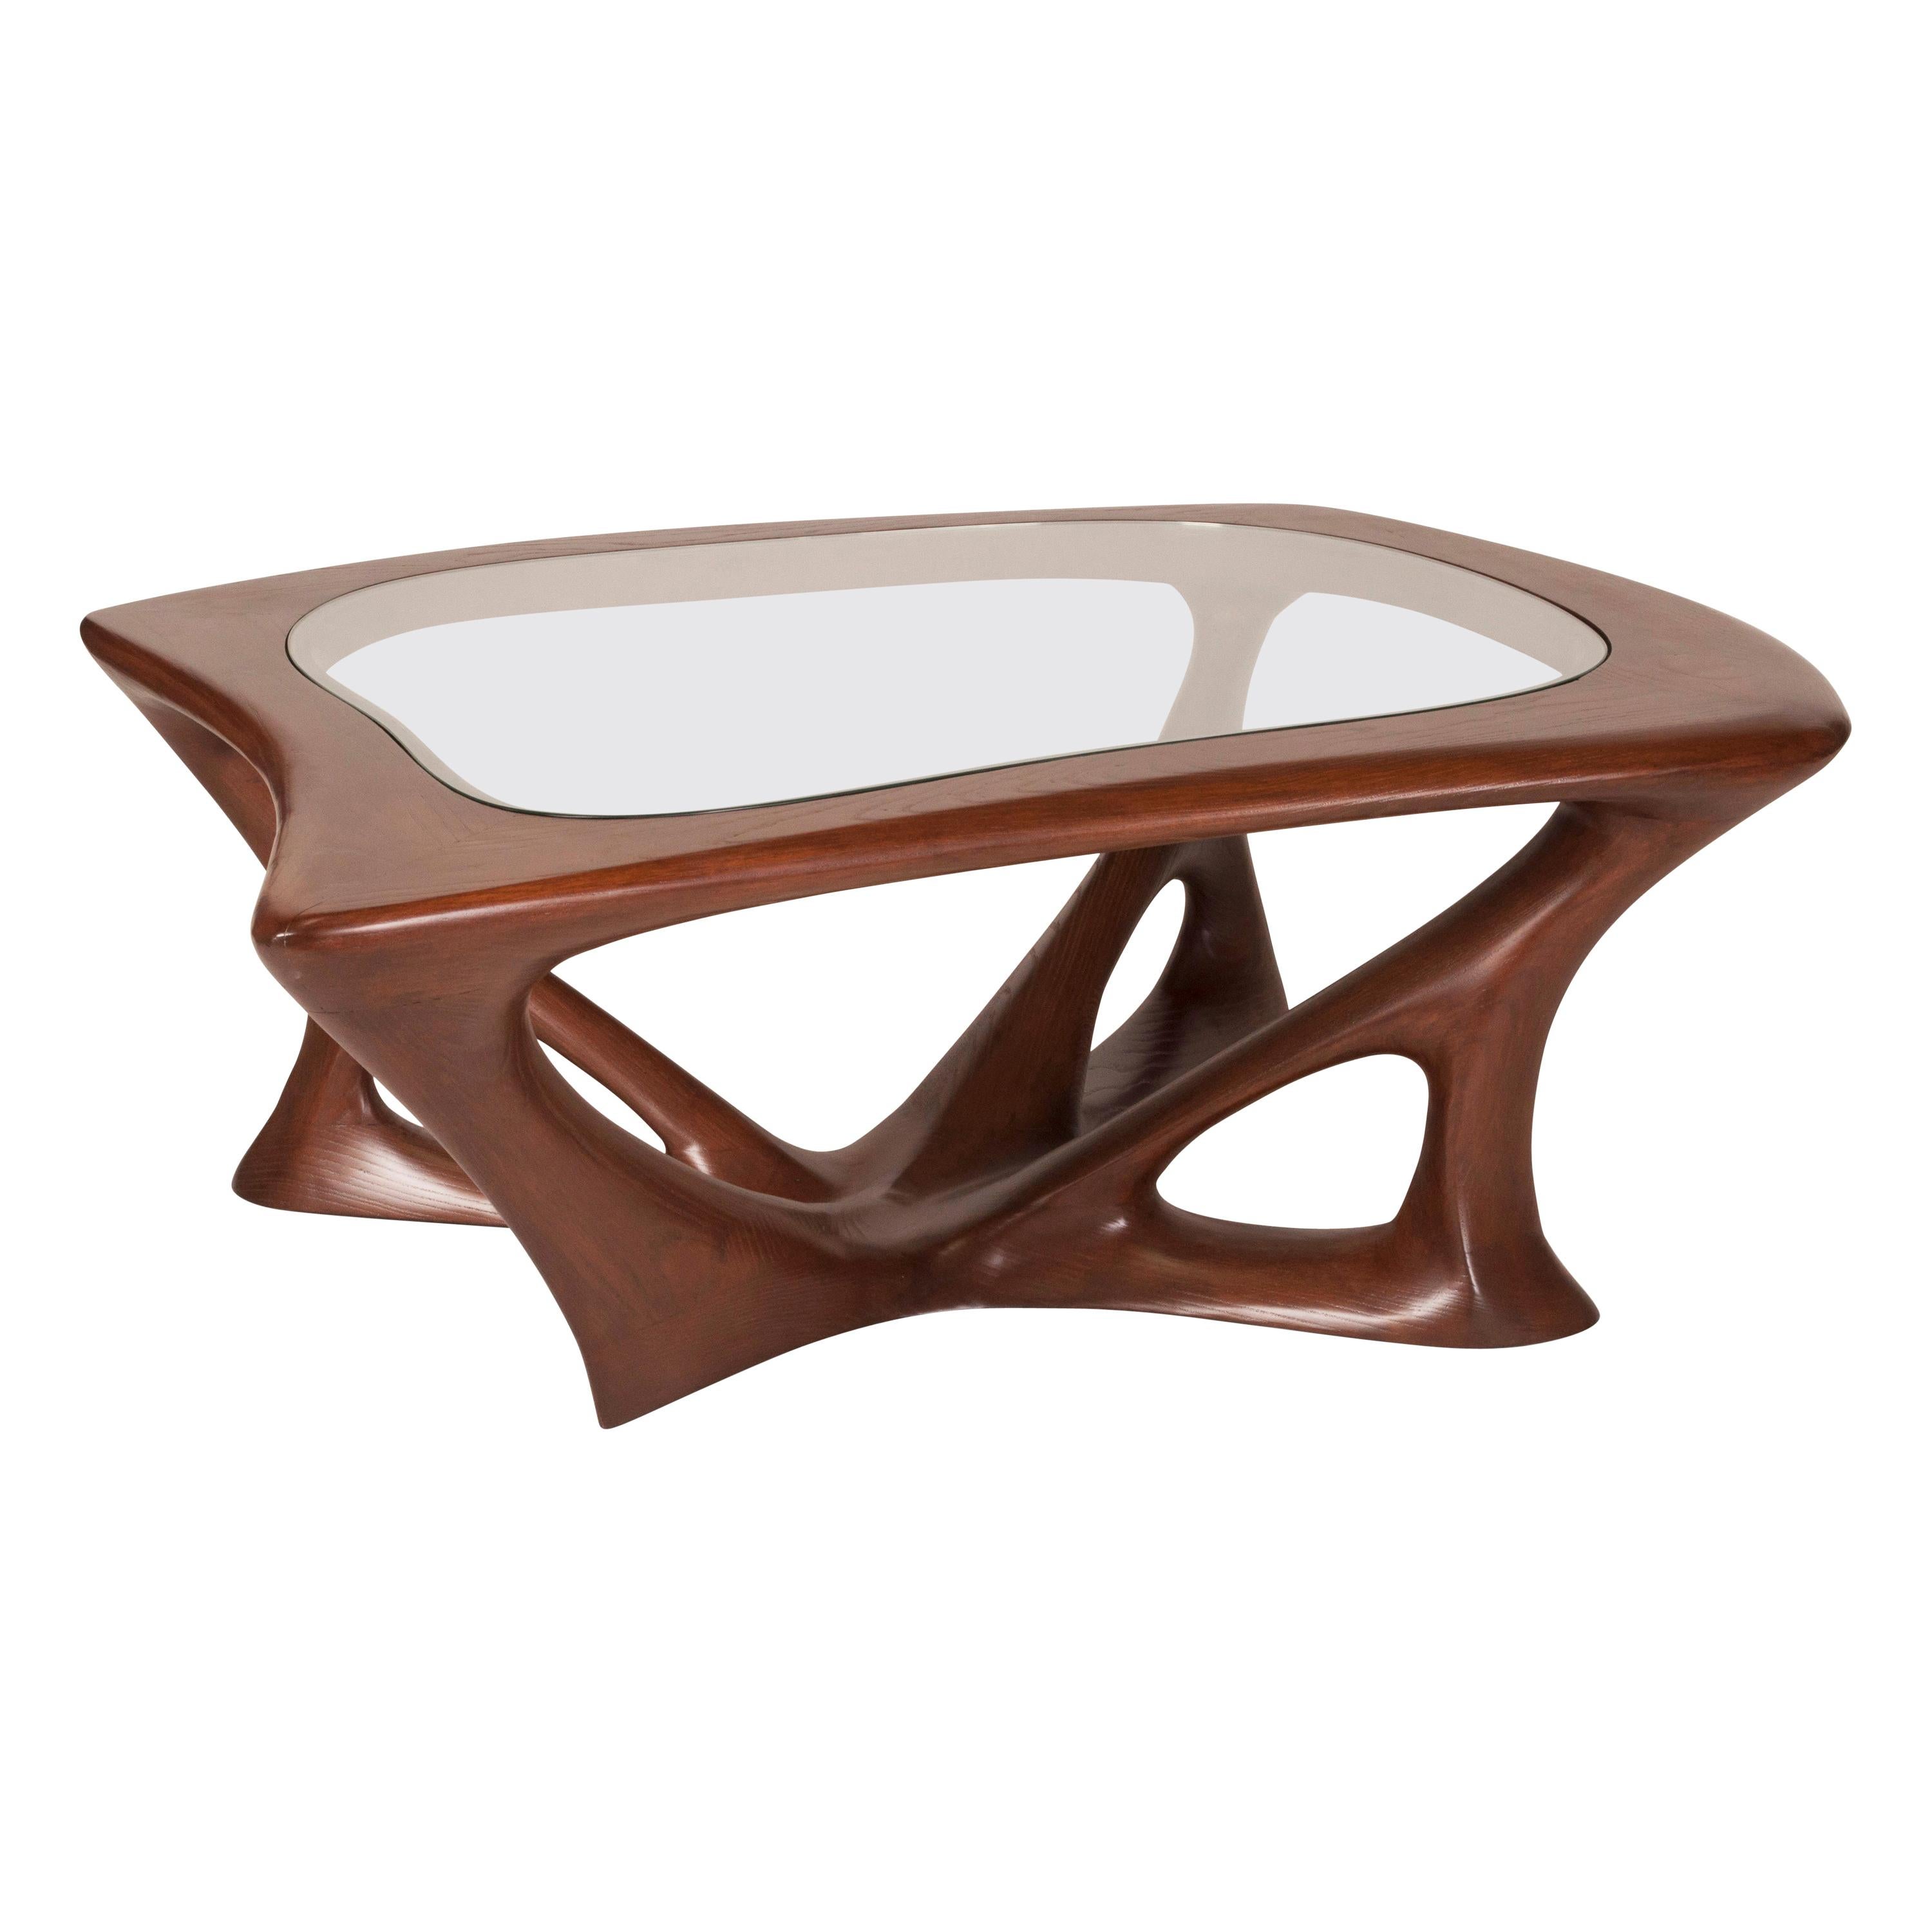 Ariella Coffee Table, Solid Wood, Walnut Stained